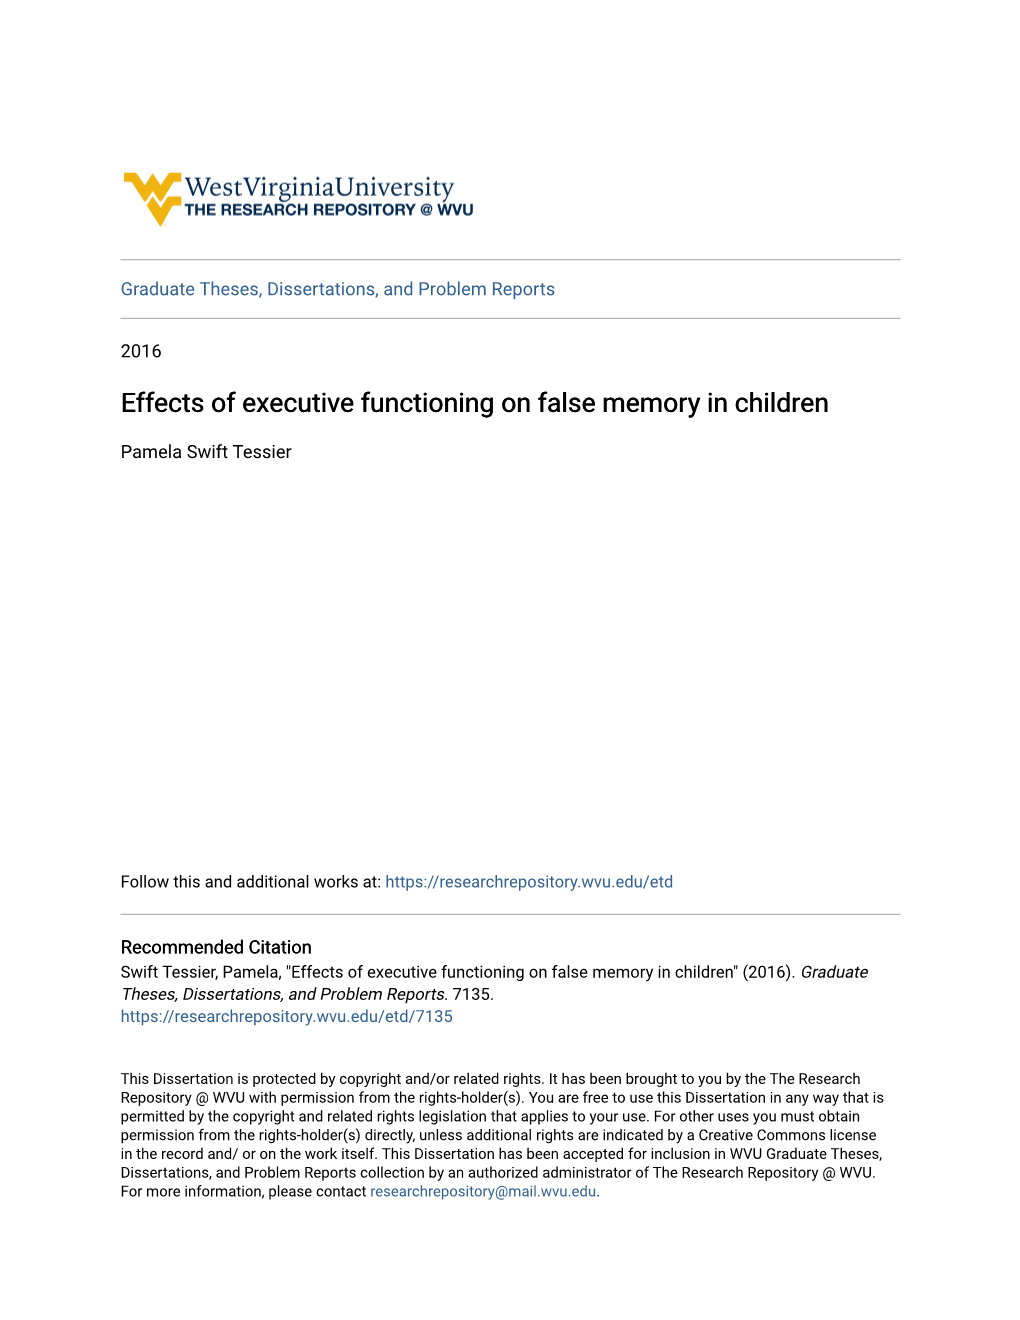 Effects of Executive Functioning on False Memory in Children